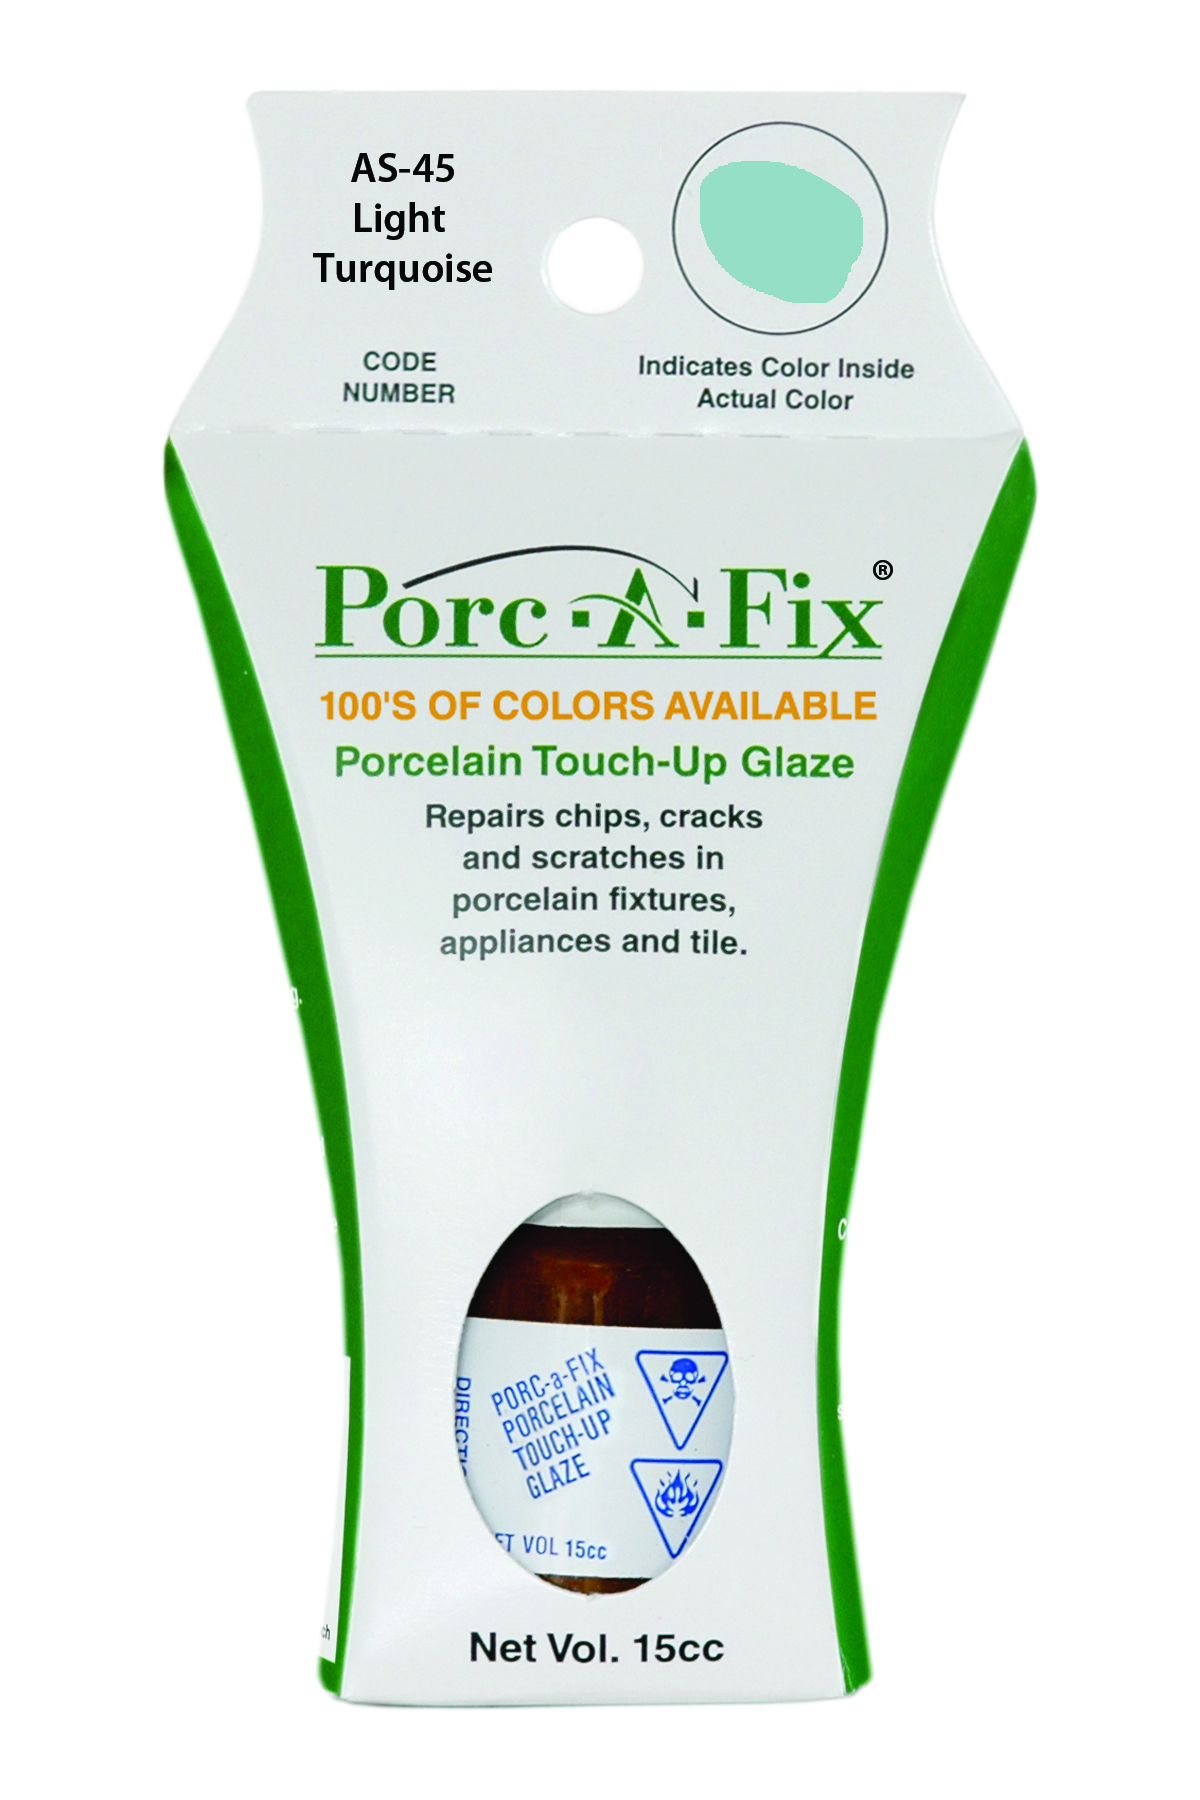 Fixture-Fix | AS-45 | Porc-A-Fix Touch-Up Glaze American Standard Light Turquoise - Compatible with American Standard 070900-1910A Touch Up Paint Kit - LIGHT TURQUOISE